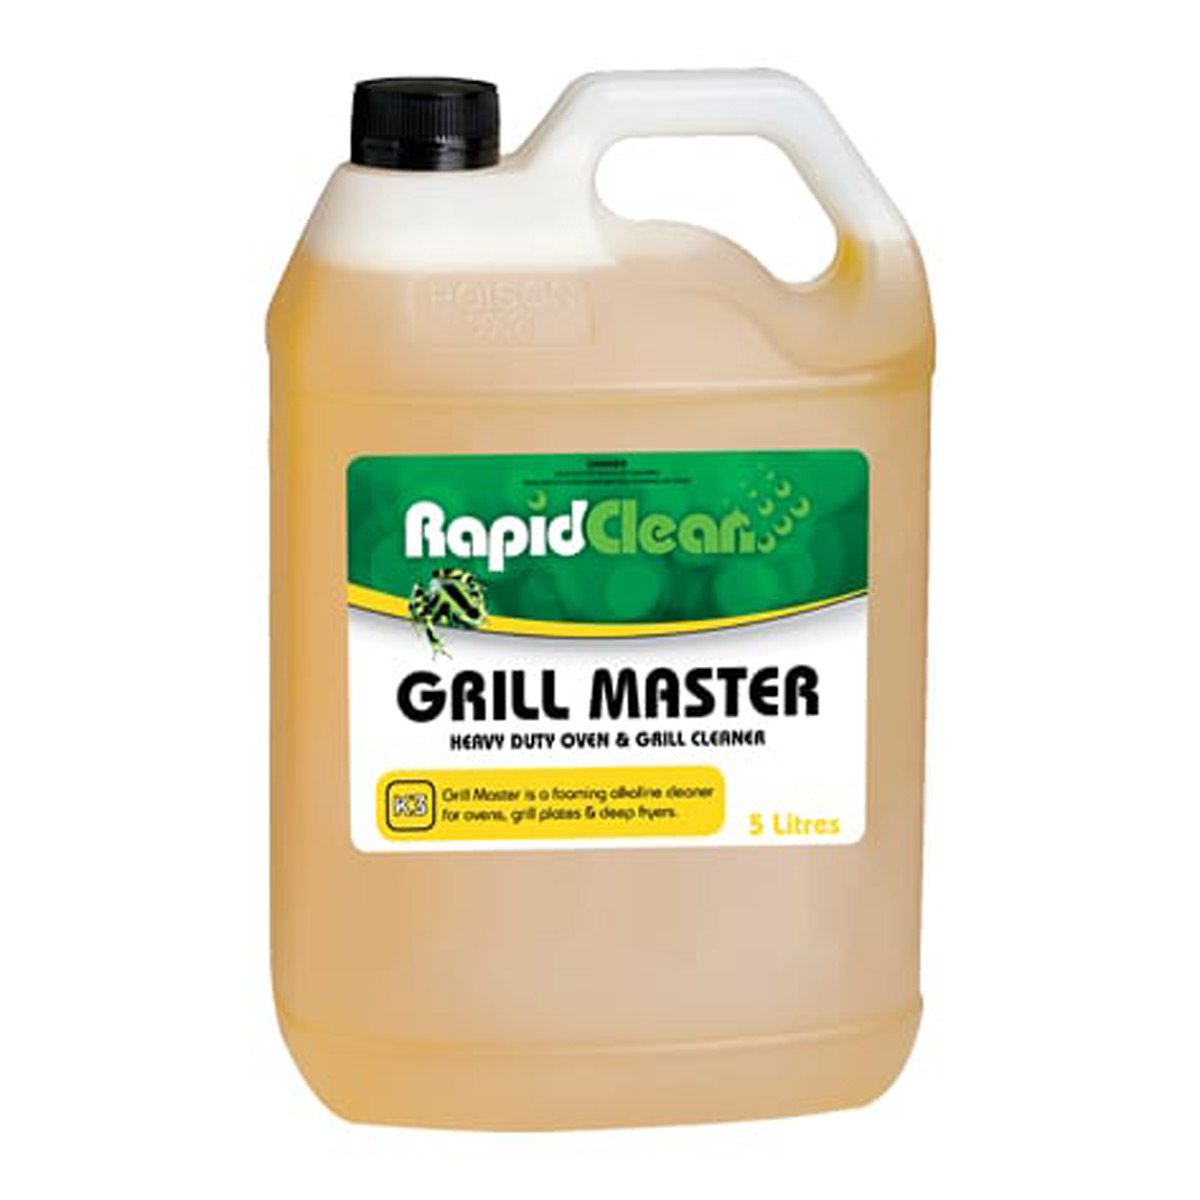 cleaning-products-kitchen-multipurpose-rapidclean-grill-master-oven-and-grill-5L-litre-caustic-base-foaming-alkaline-cleaner-for-ovens-grills-hot-plates-deep-fryers-vjs-distributors-RAP140050